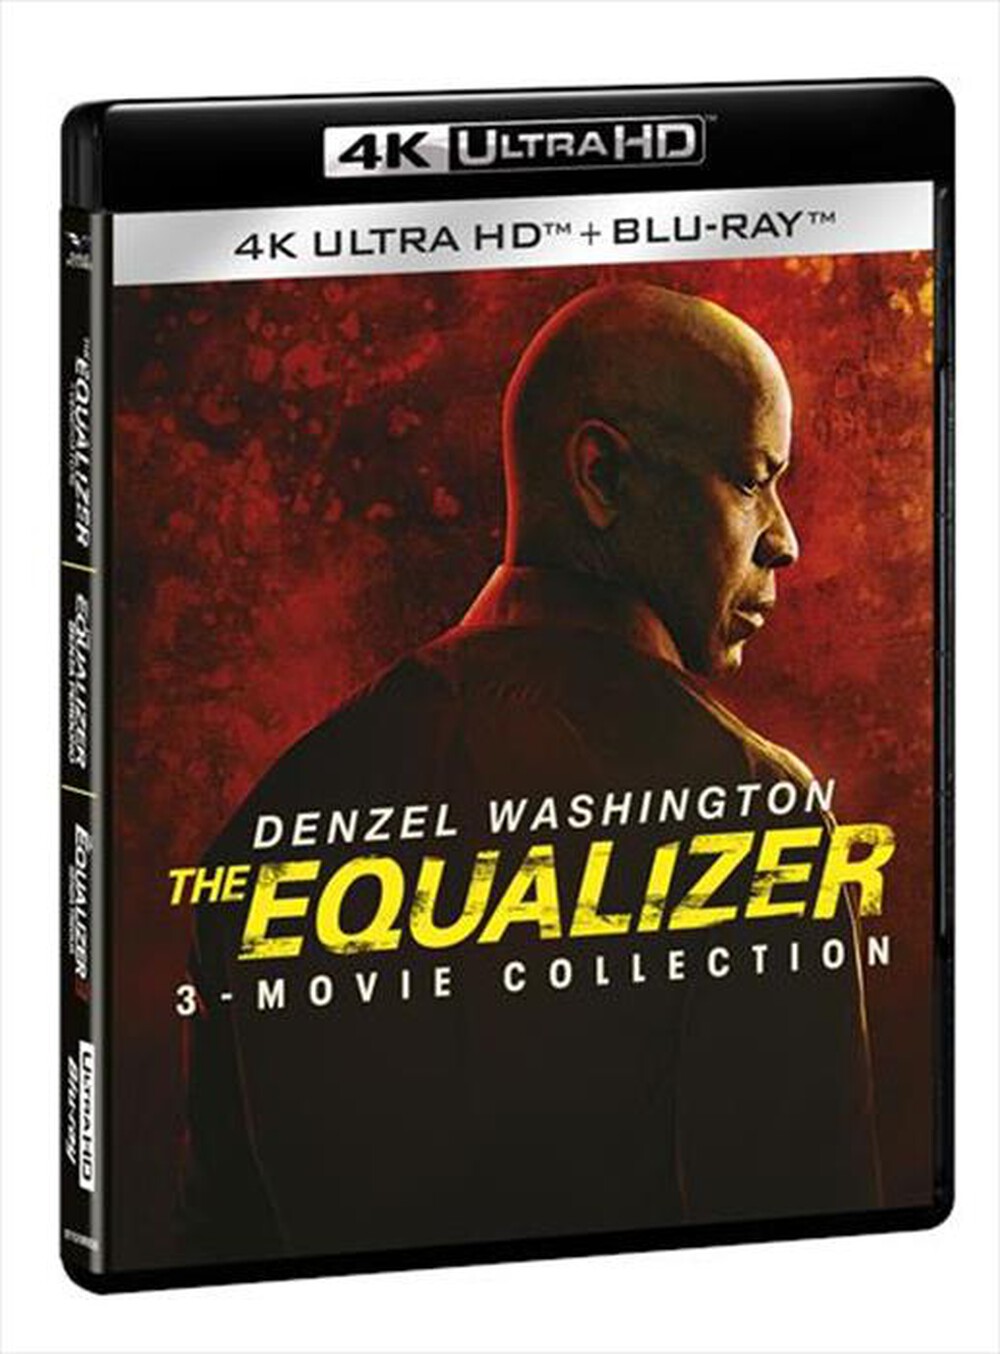 "SONY PICTURES - COFBR4K THE EQUALIZER 1"